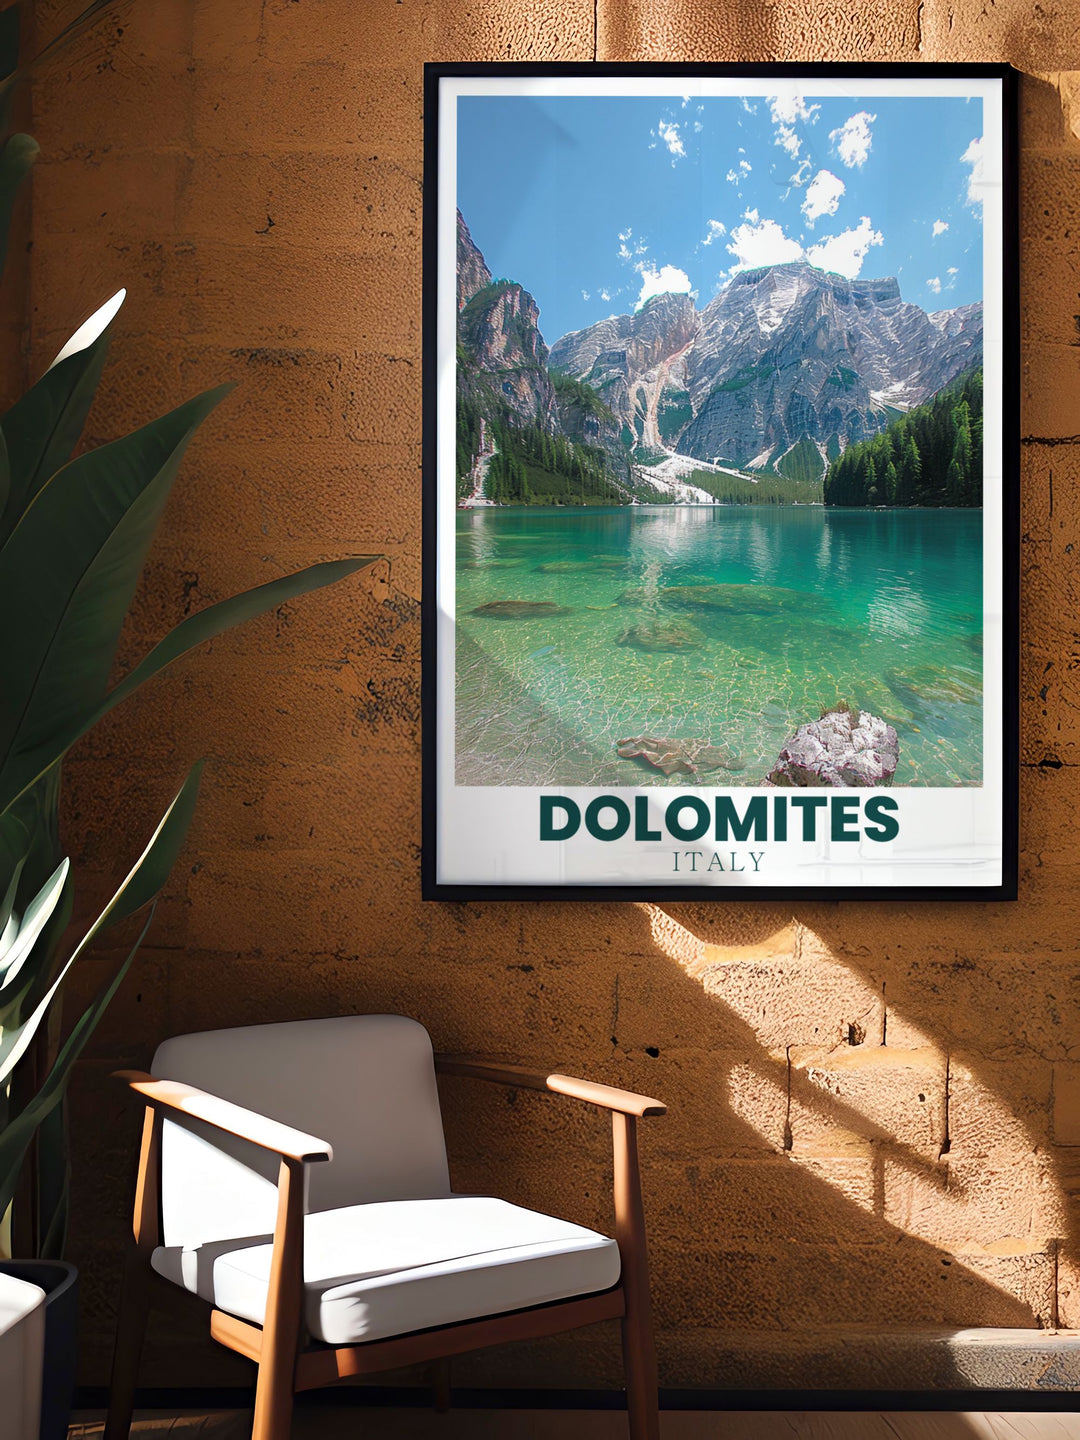 Elegant Lago di Braies Artwork featuring the tranquil beauty of the Italy mountains. This Italy travel print is a wonderful addition to your home decor. Celebrate the natural splendor of the Dolomites Italy with this stunning wall art.